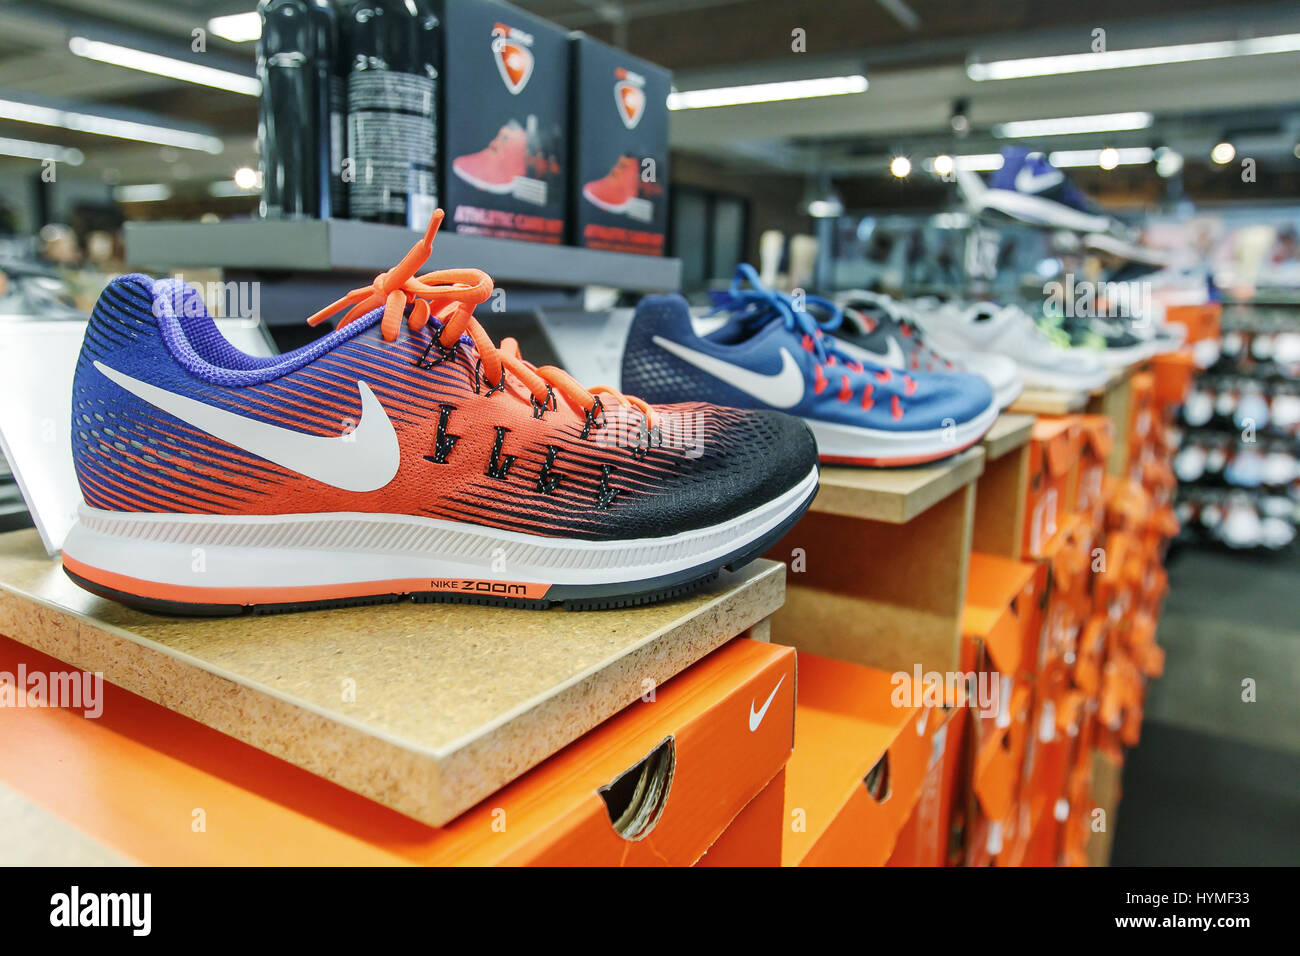 Nike shoes are set on display in a shoe store. Stock Photo